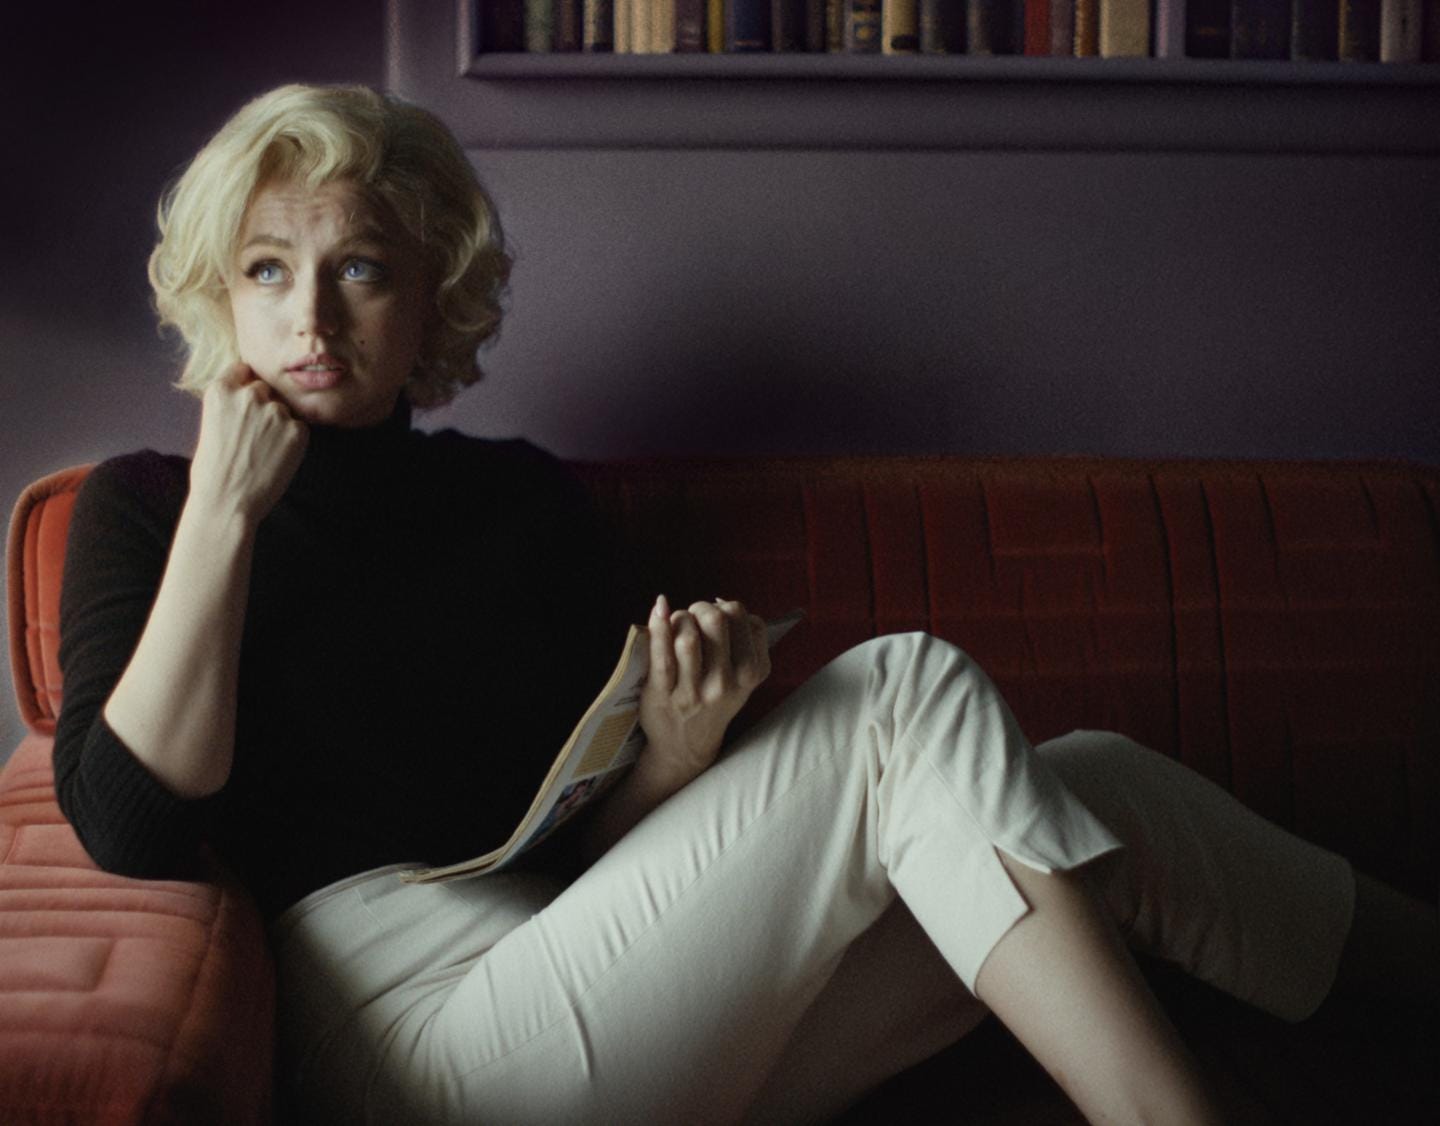 A white woman with blond hair sits on a sofa. She is wearing a black turtleneck and white pants.